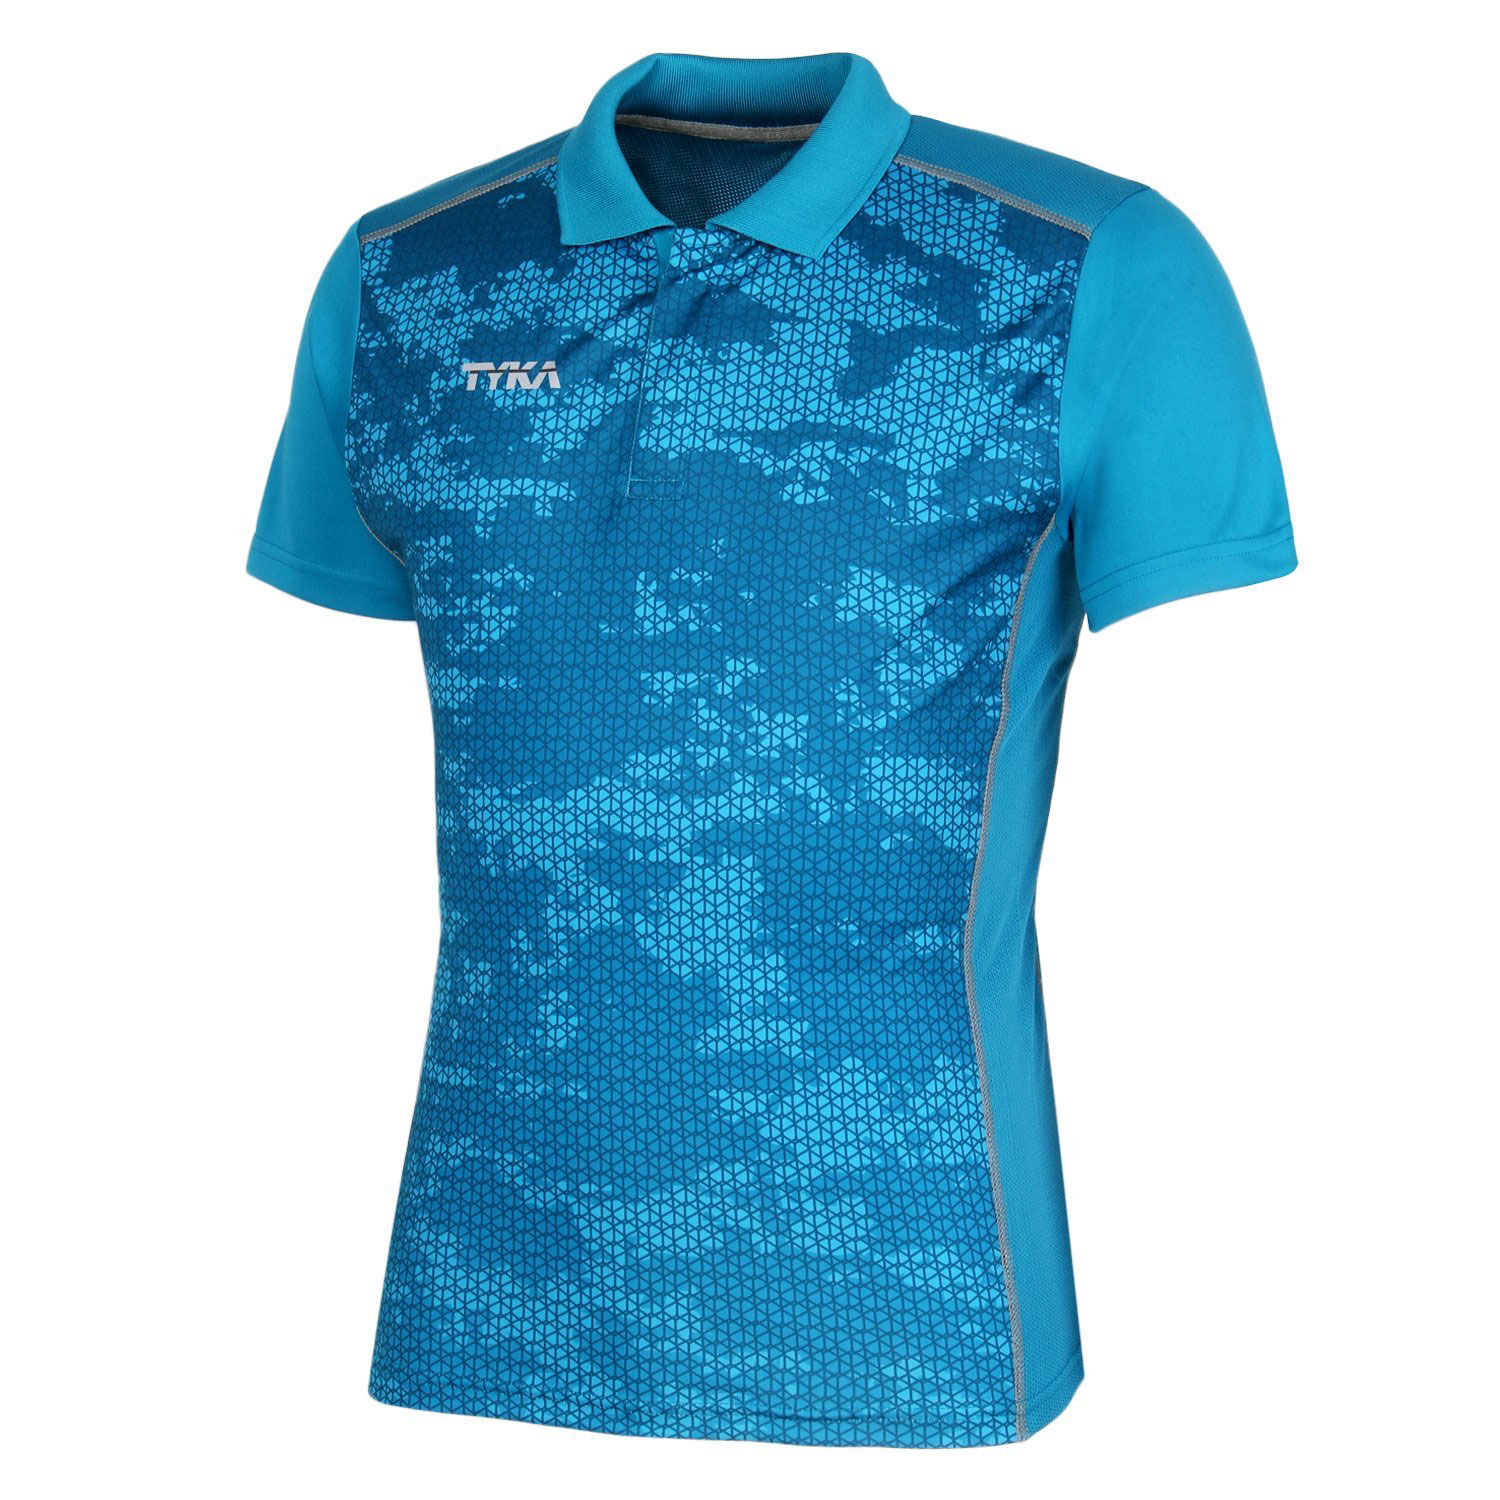  MOMENTUM Polo ( For Game / Training ) 